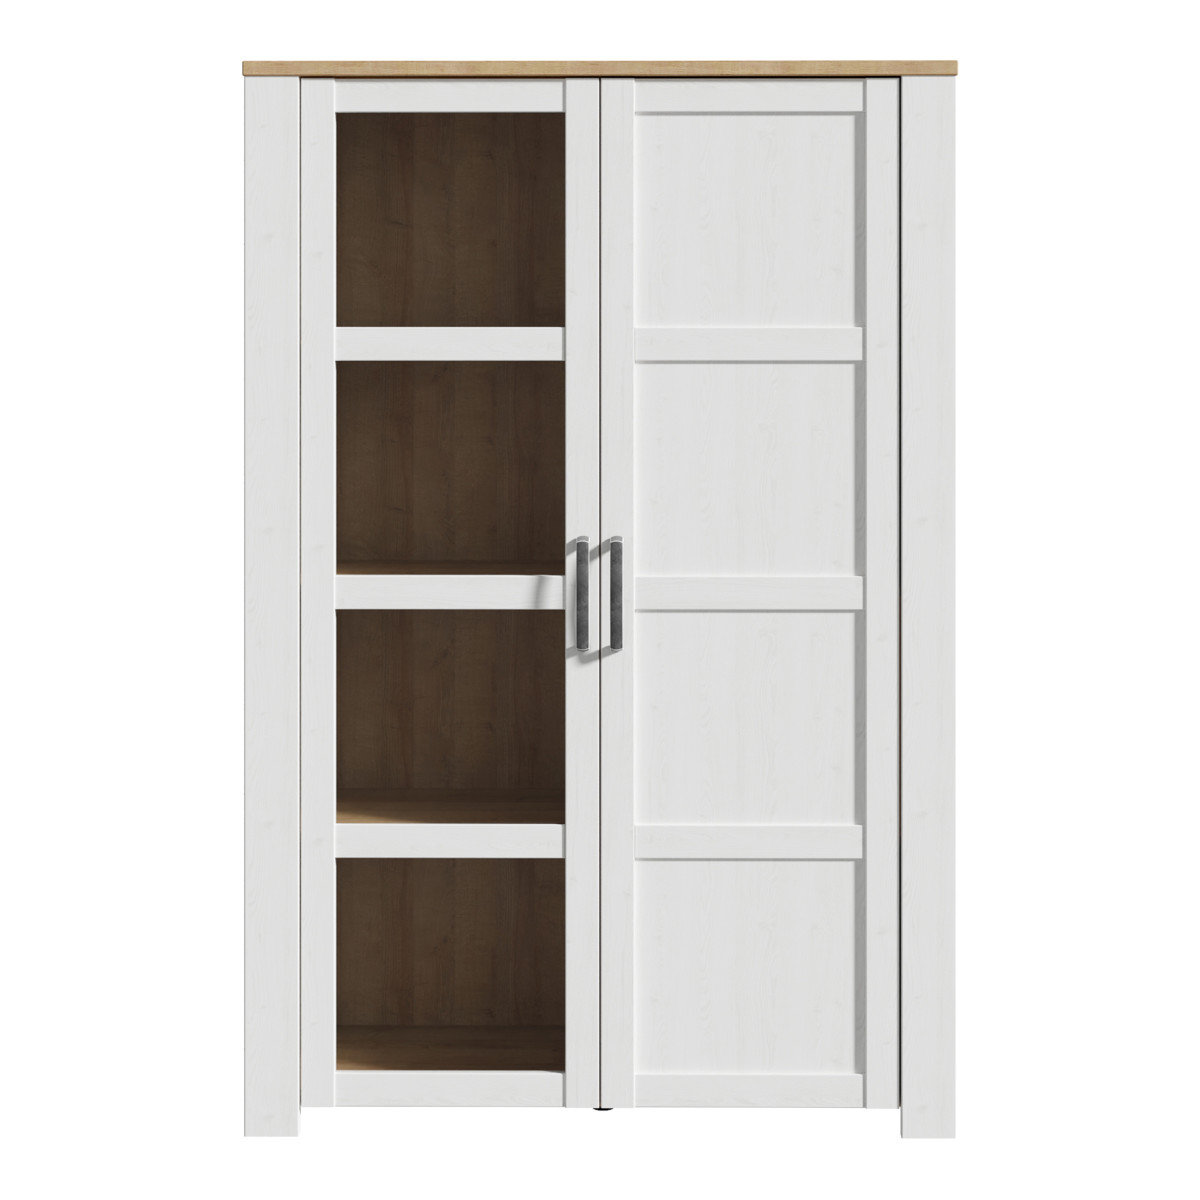 Bohol Display Cabinet in Riviera Oak and White